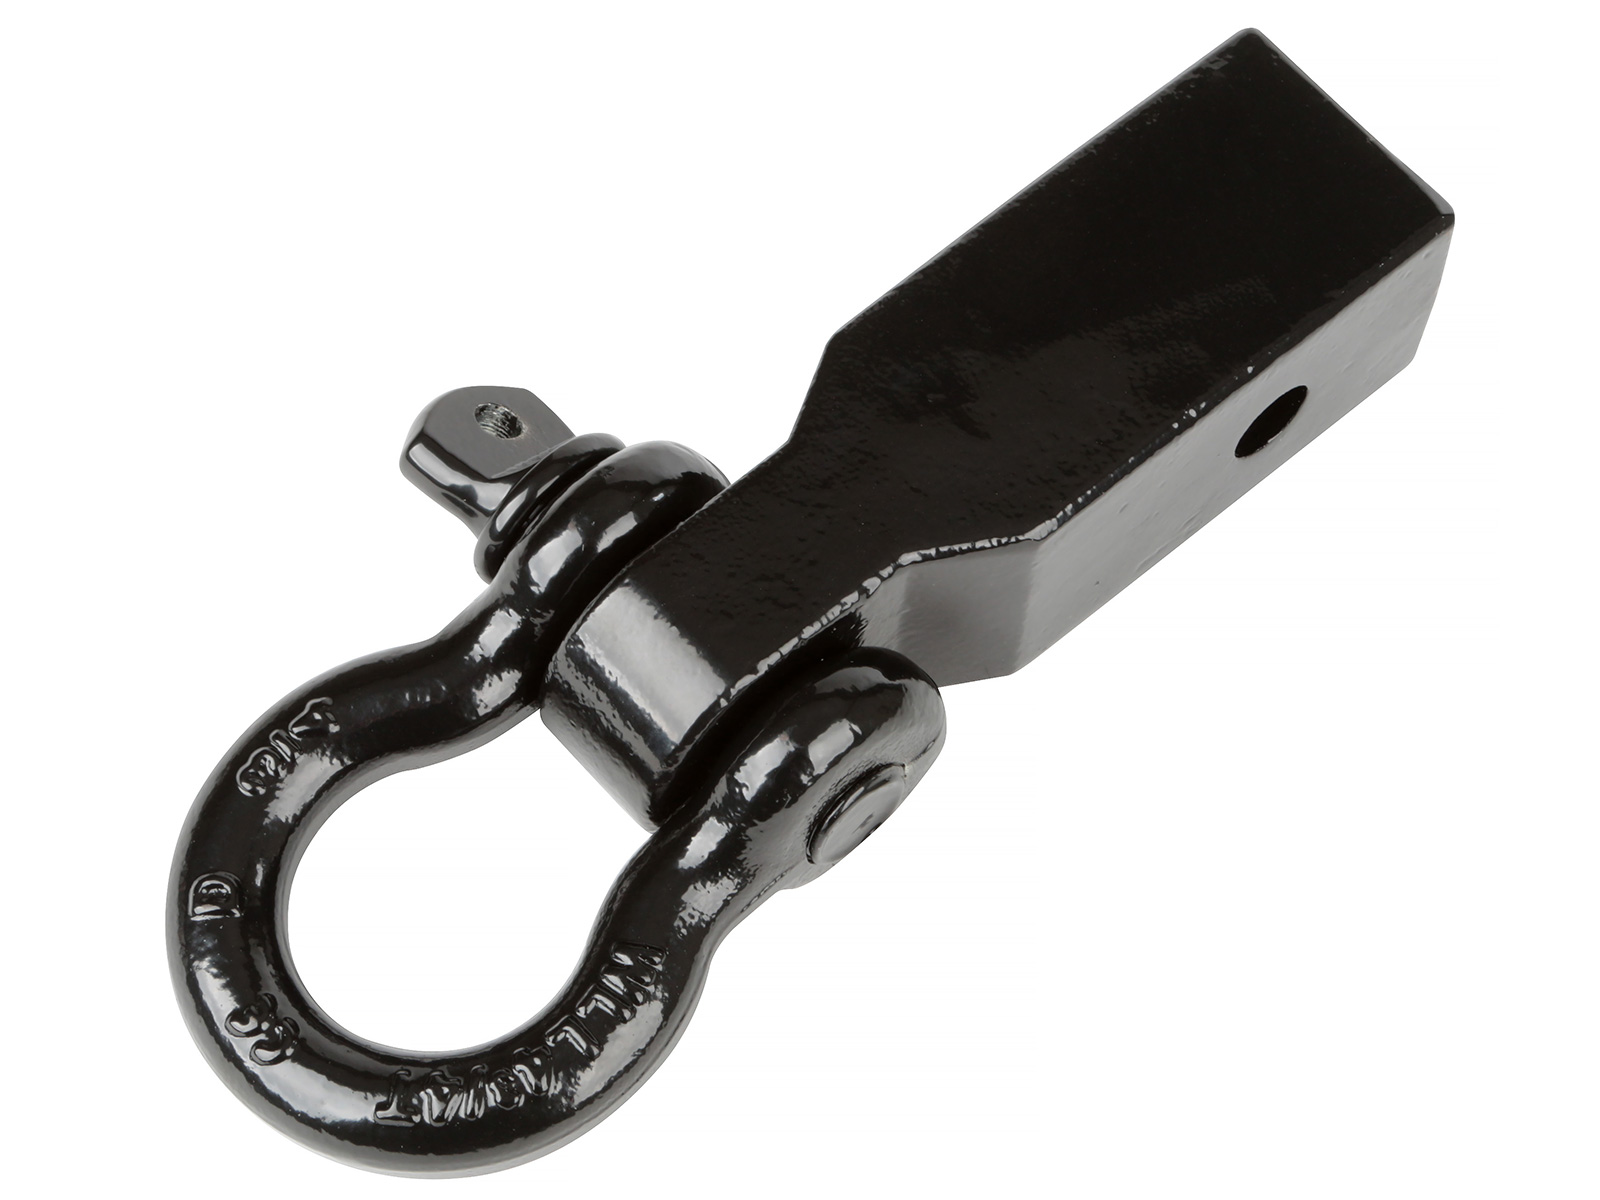 Weha Swivel Hook and Shackle, Lifting Accessories